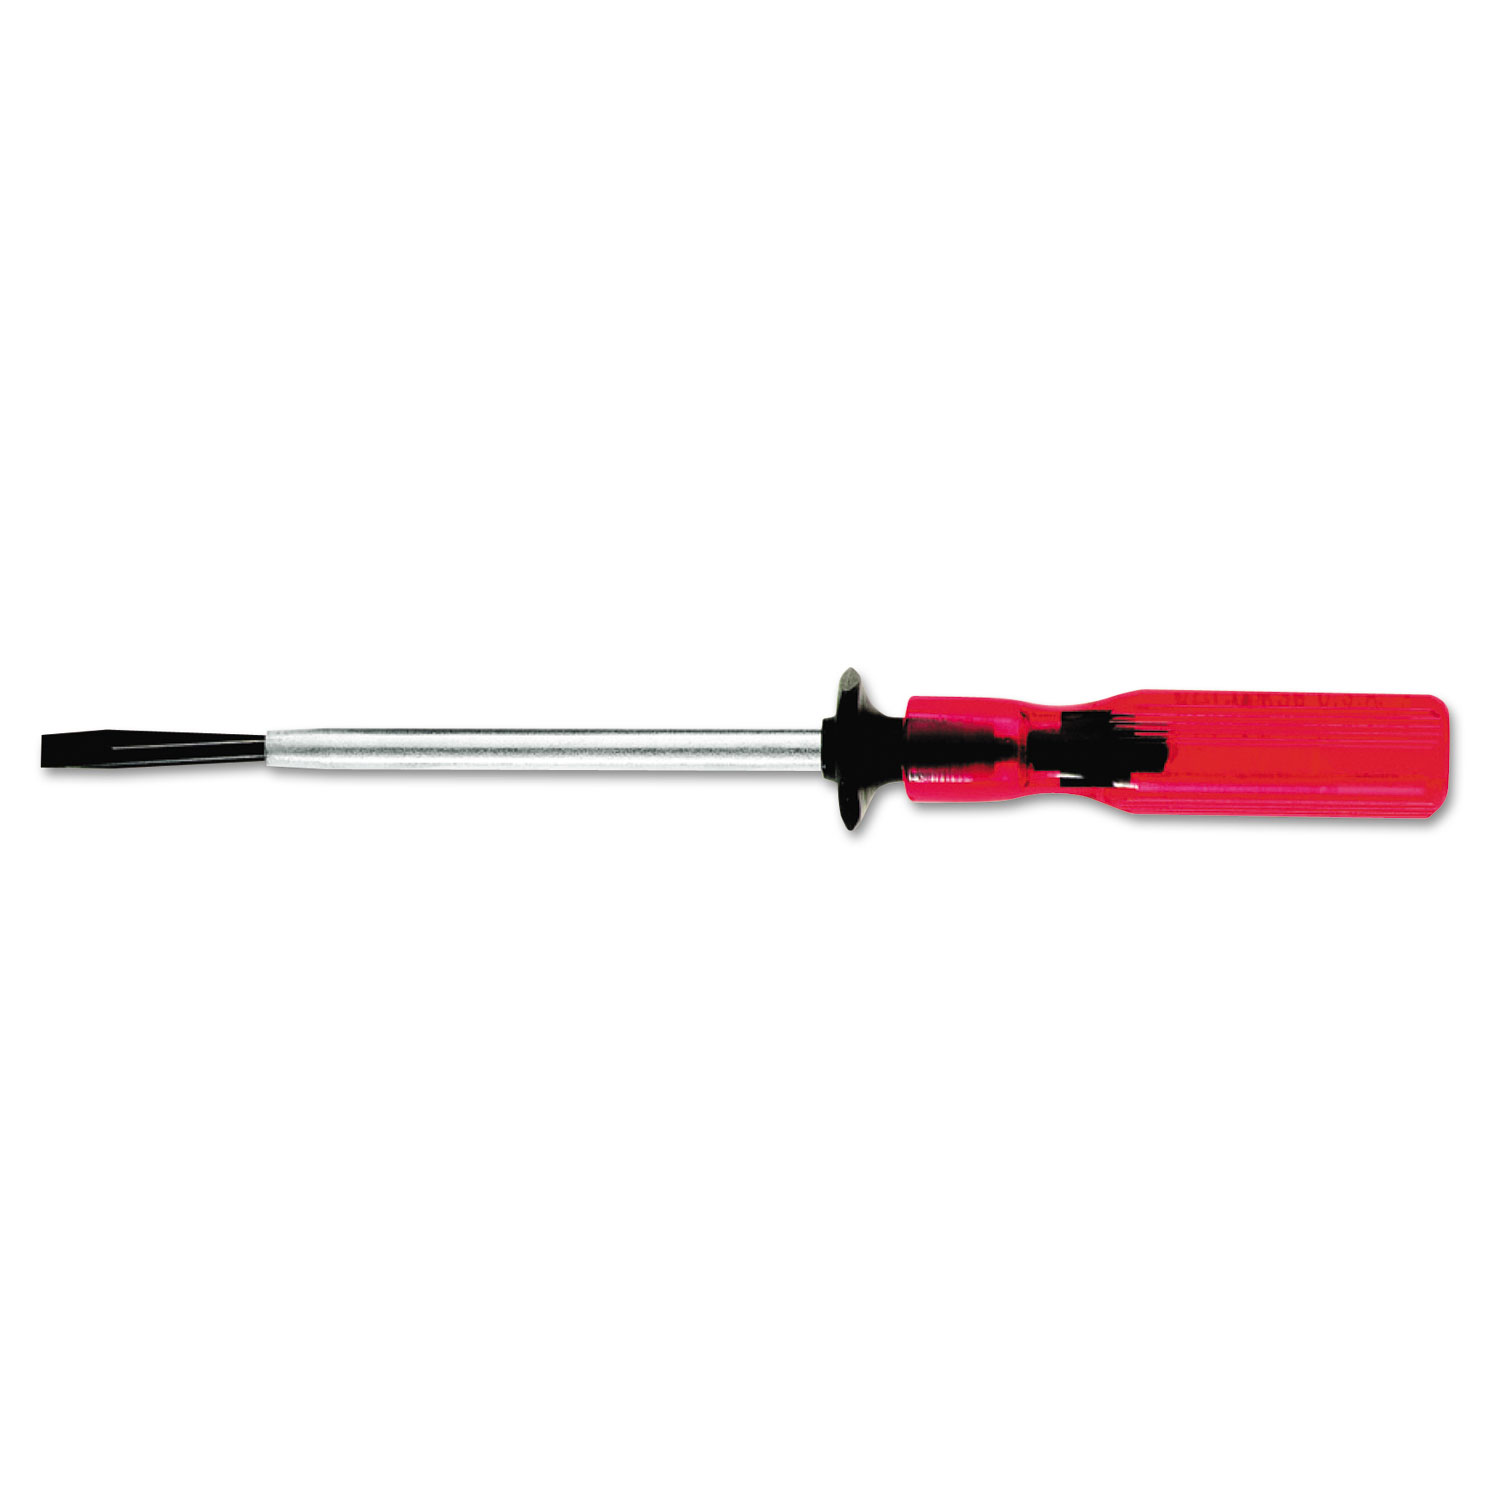 Vaco Slotted Screw-Holding Screwdriver, 3/16in, 5 1/4in Long